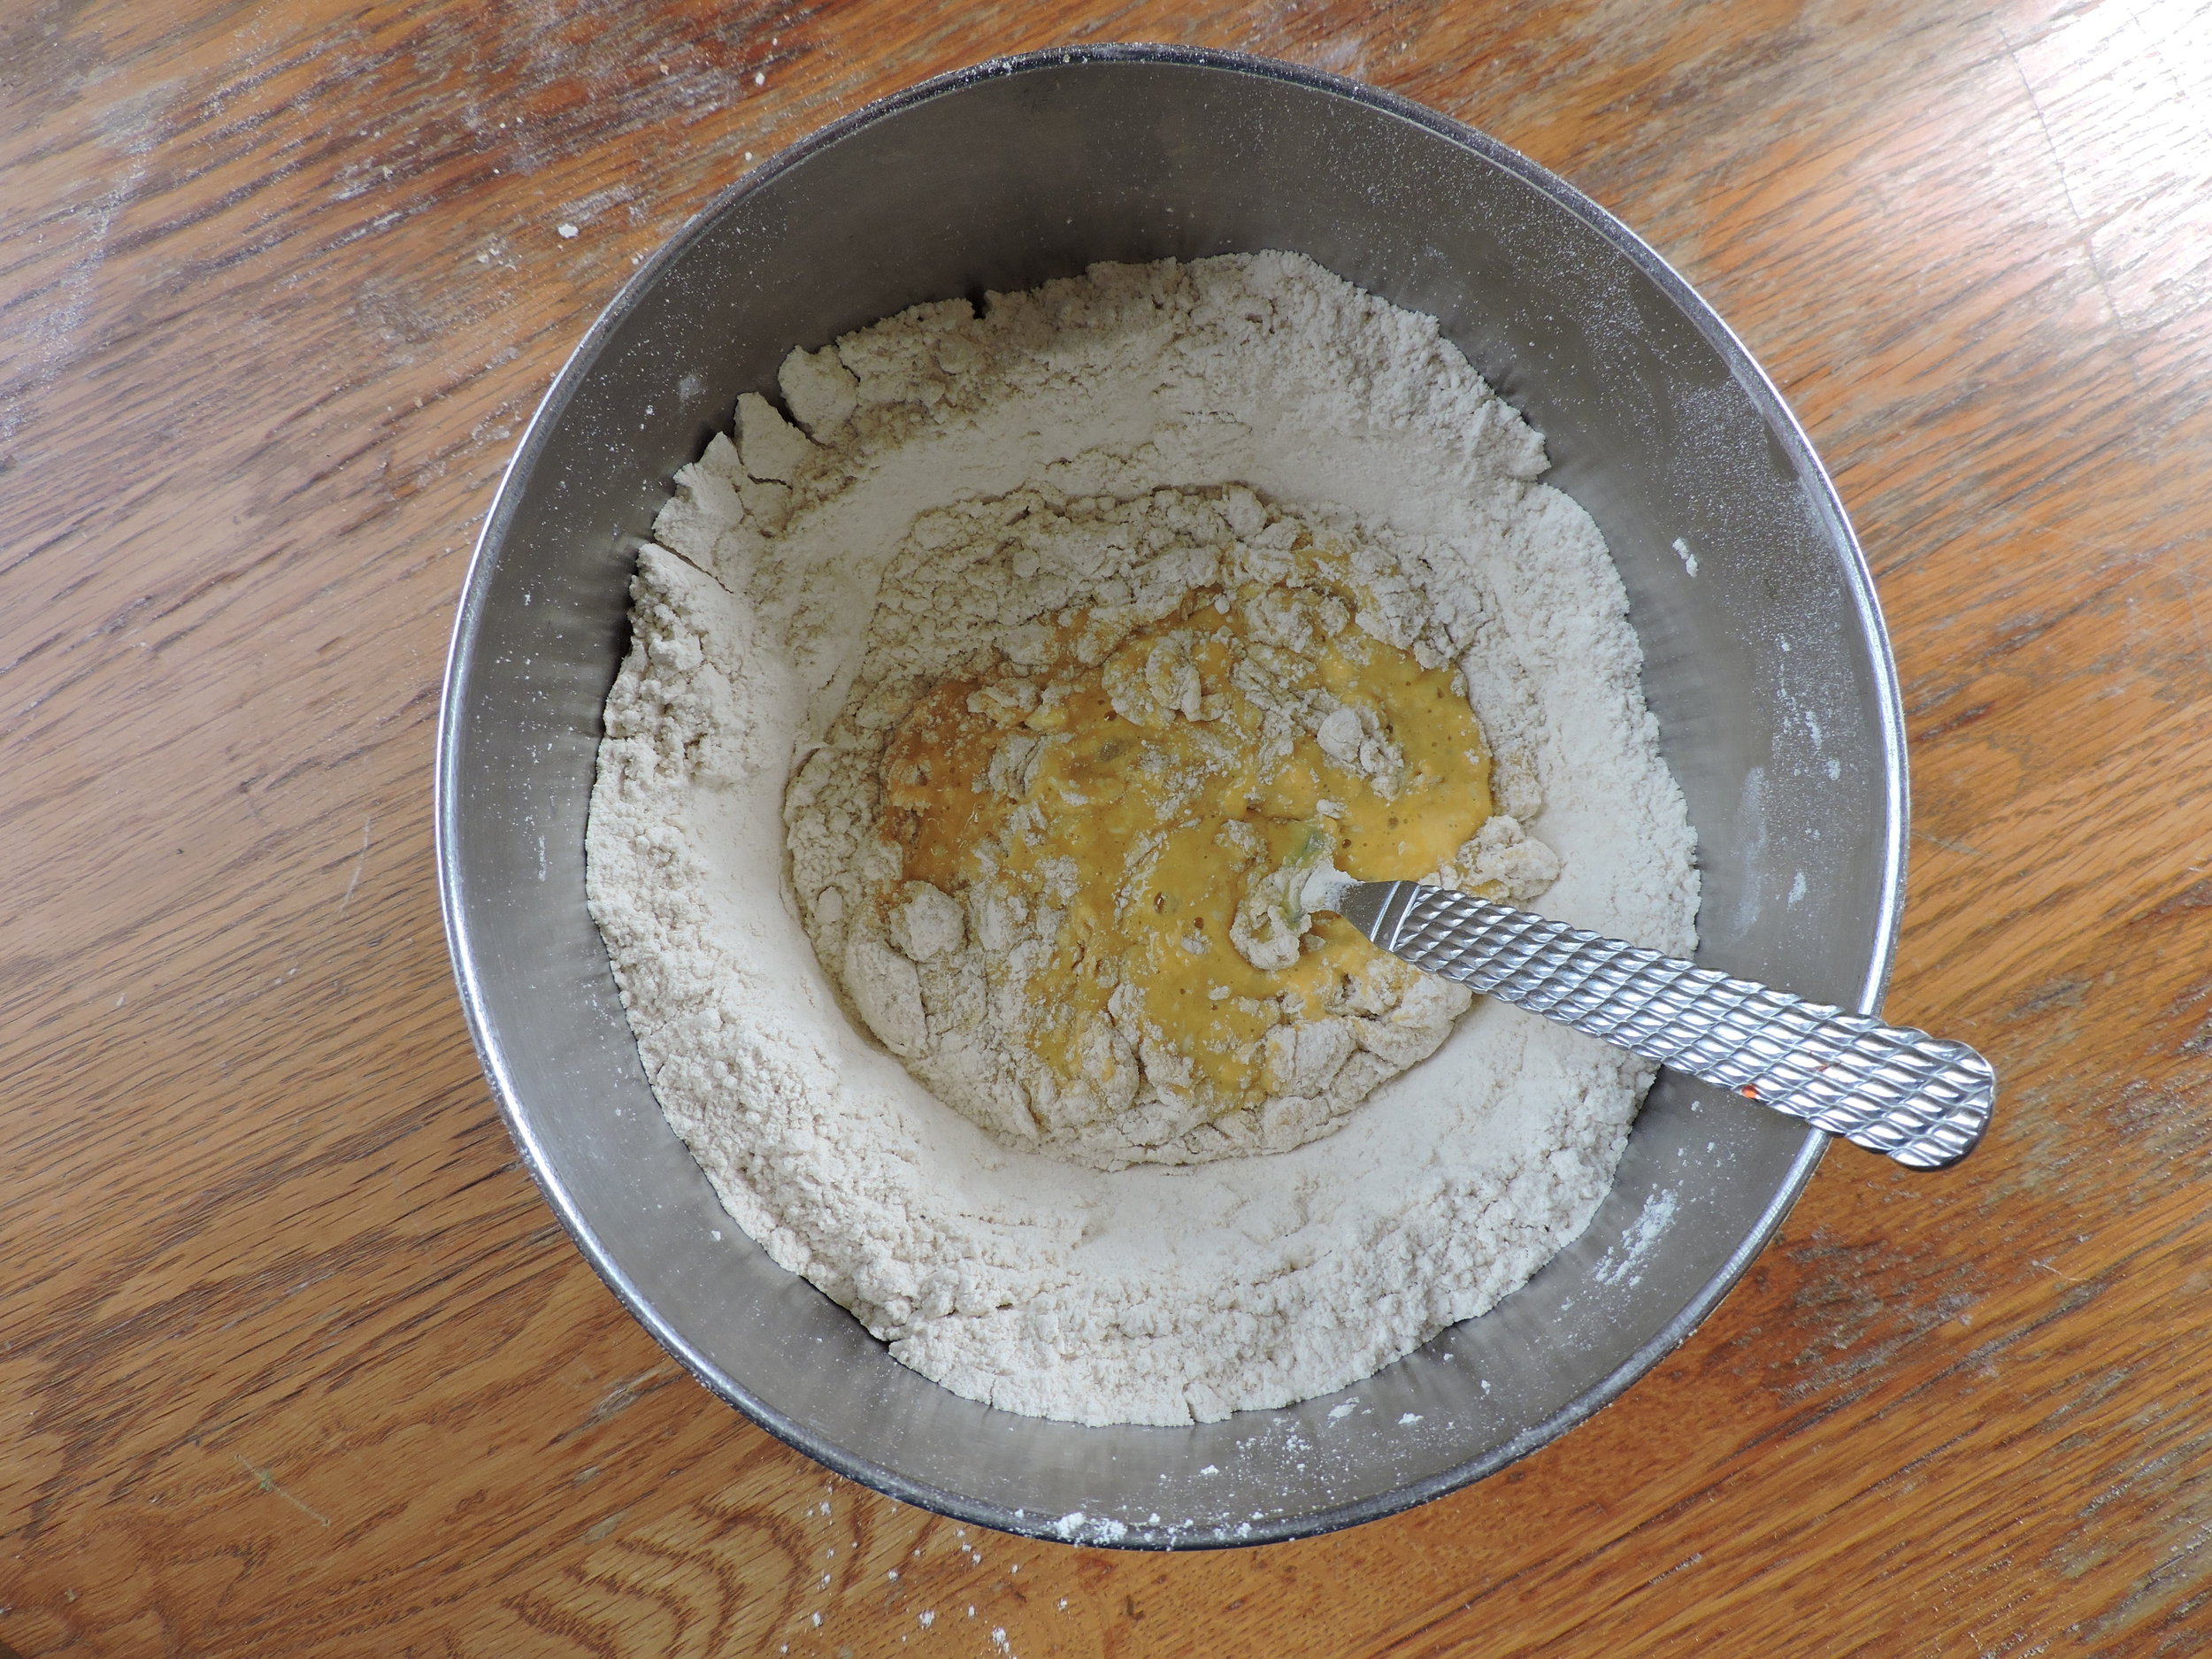  Slowly incorporate flour into egg mixture. 